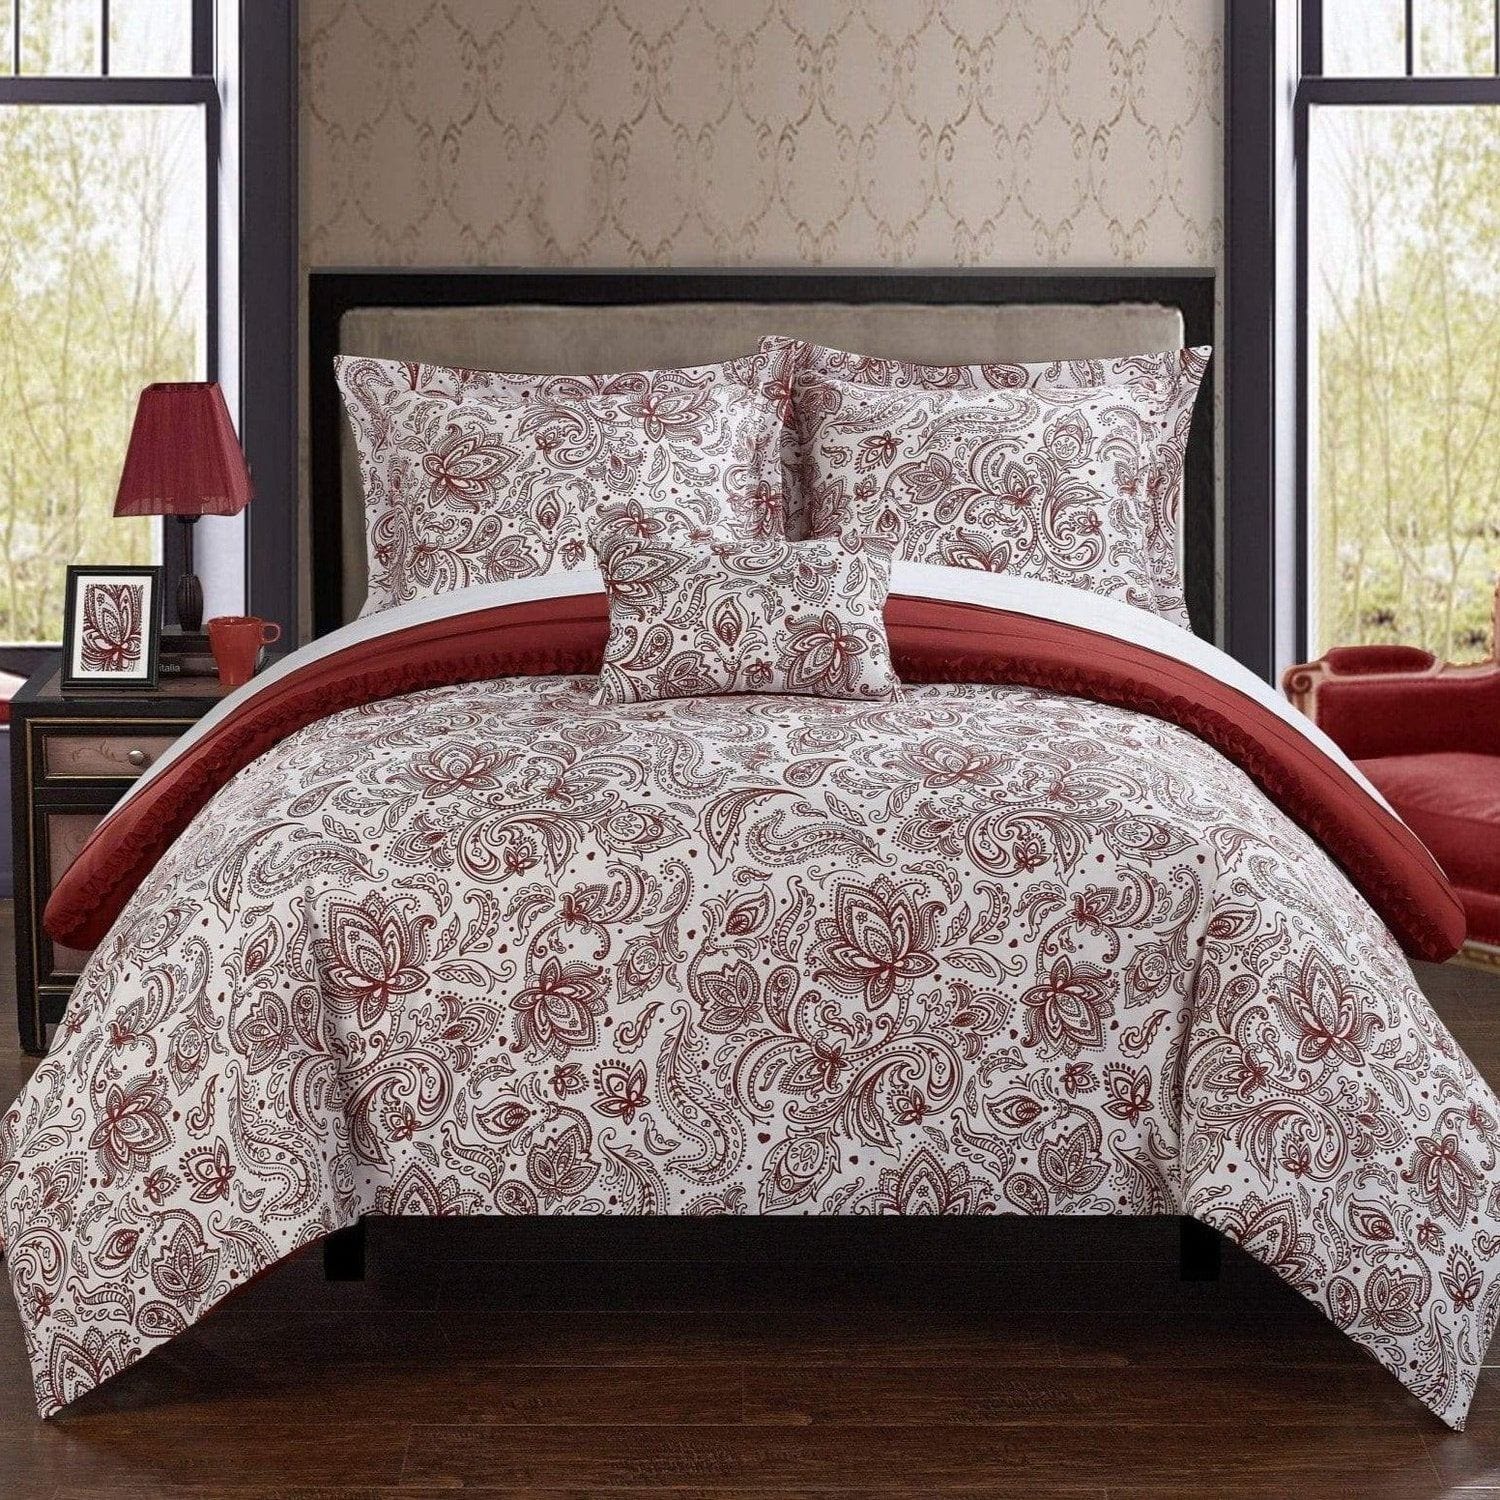 https://www.chichome.com/cdn/shop/products/chic-home-eliza-4-piece-reversible-duvet-cover-set-ruffled-floral-paisley-print-bedding-3.jpg?v=1692993969&width=2400